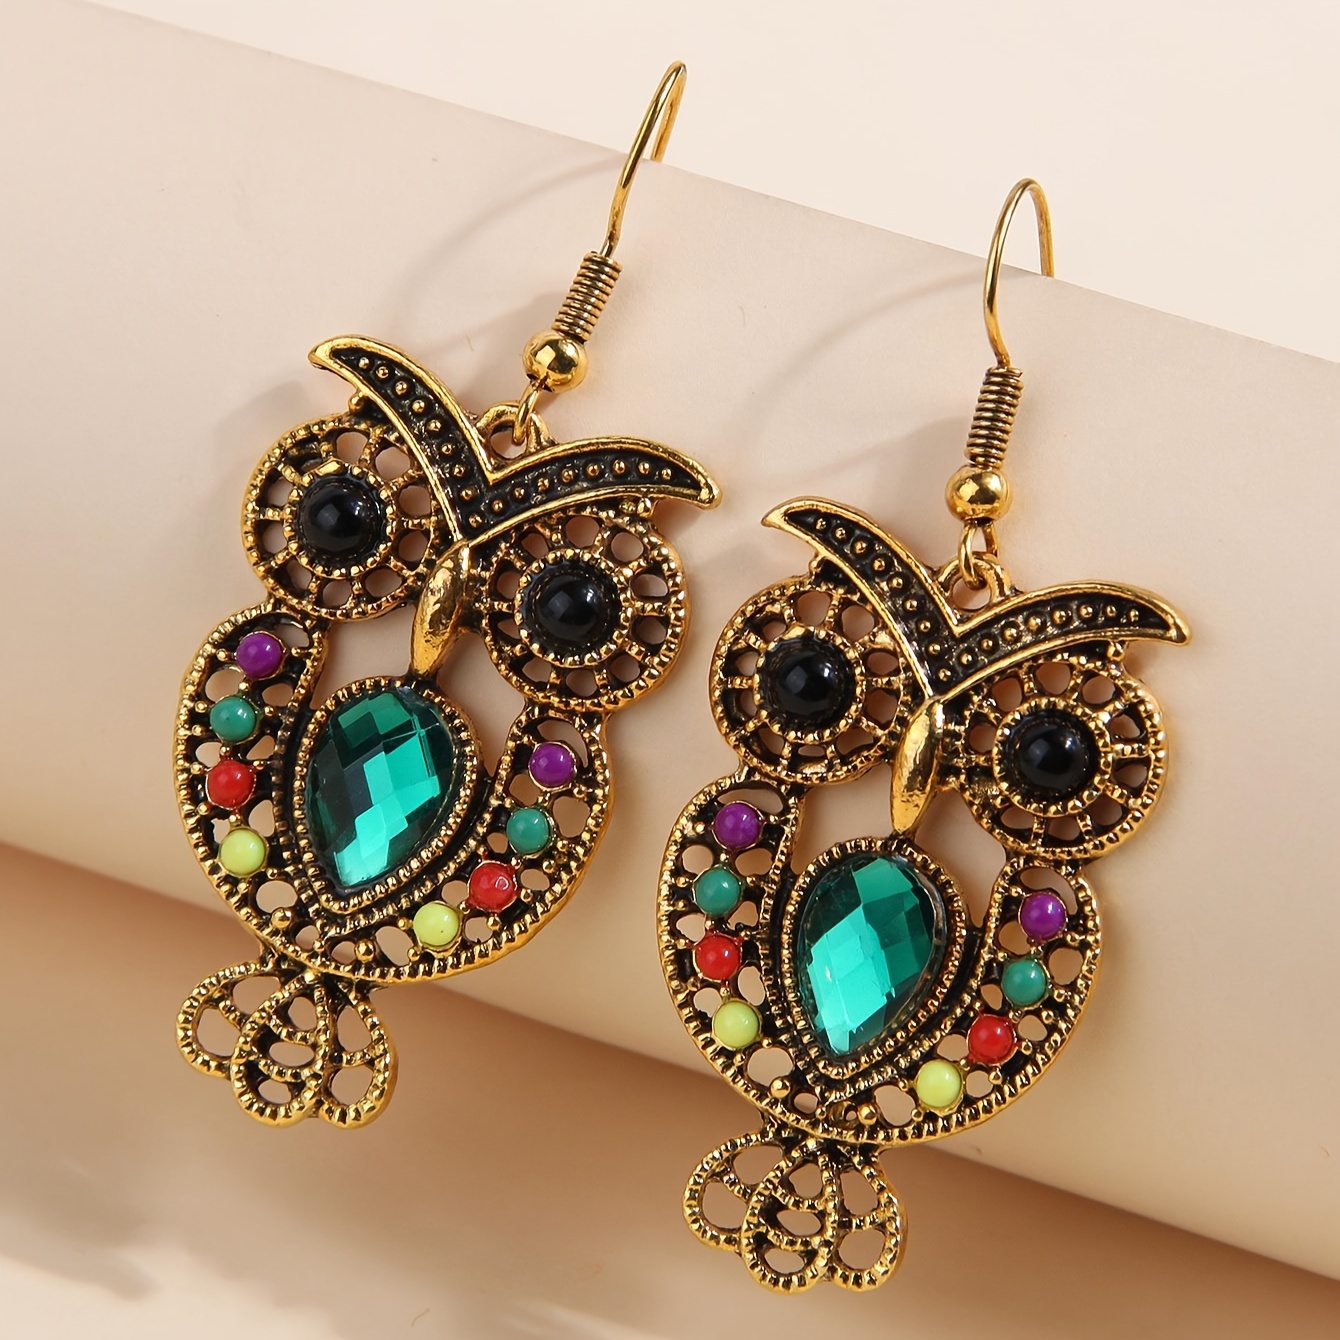 

Exquisite Wooden Owl Design Colorful Beads Rhinestone Inlaid Dangle Earrings Boho Retro Style Tourism Souvenir